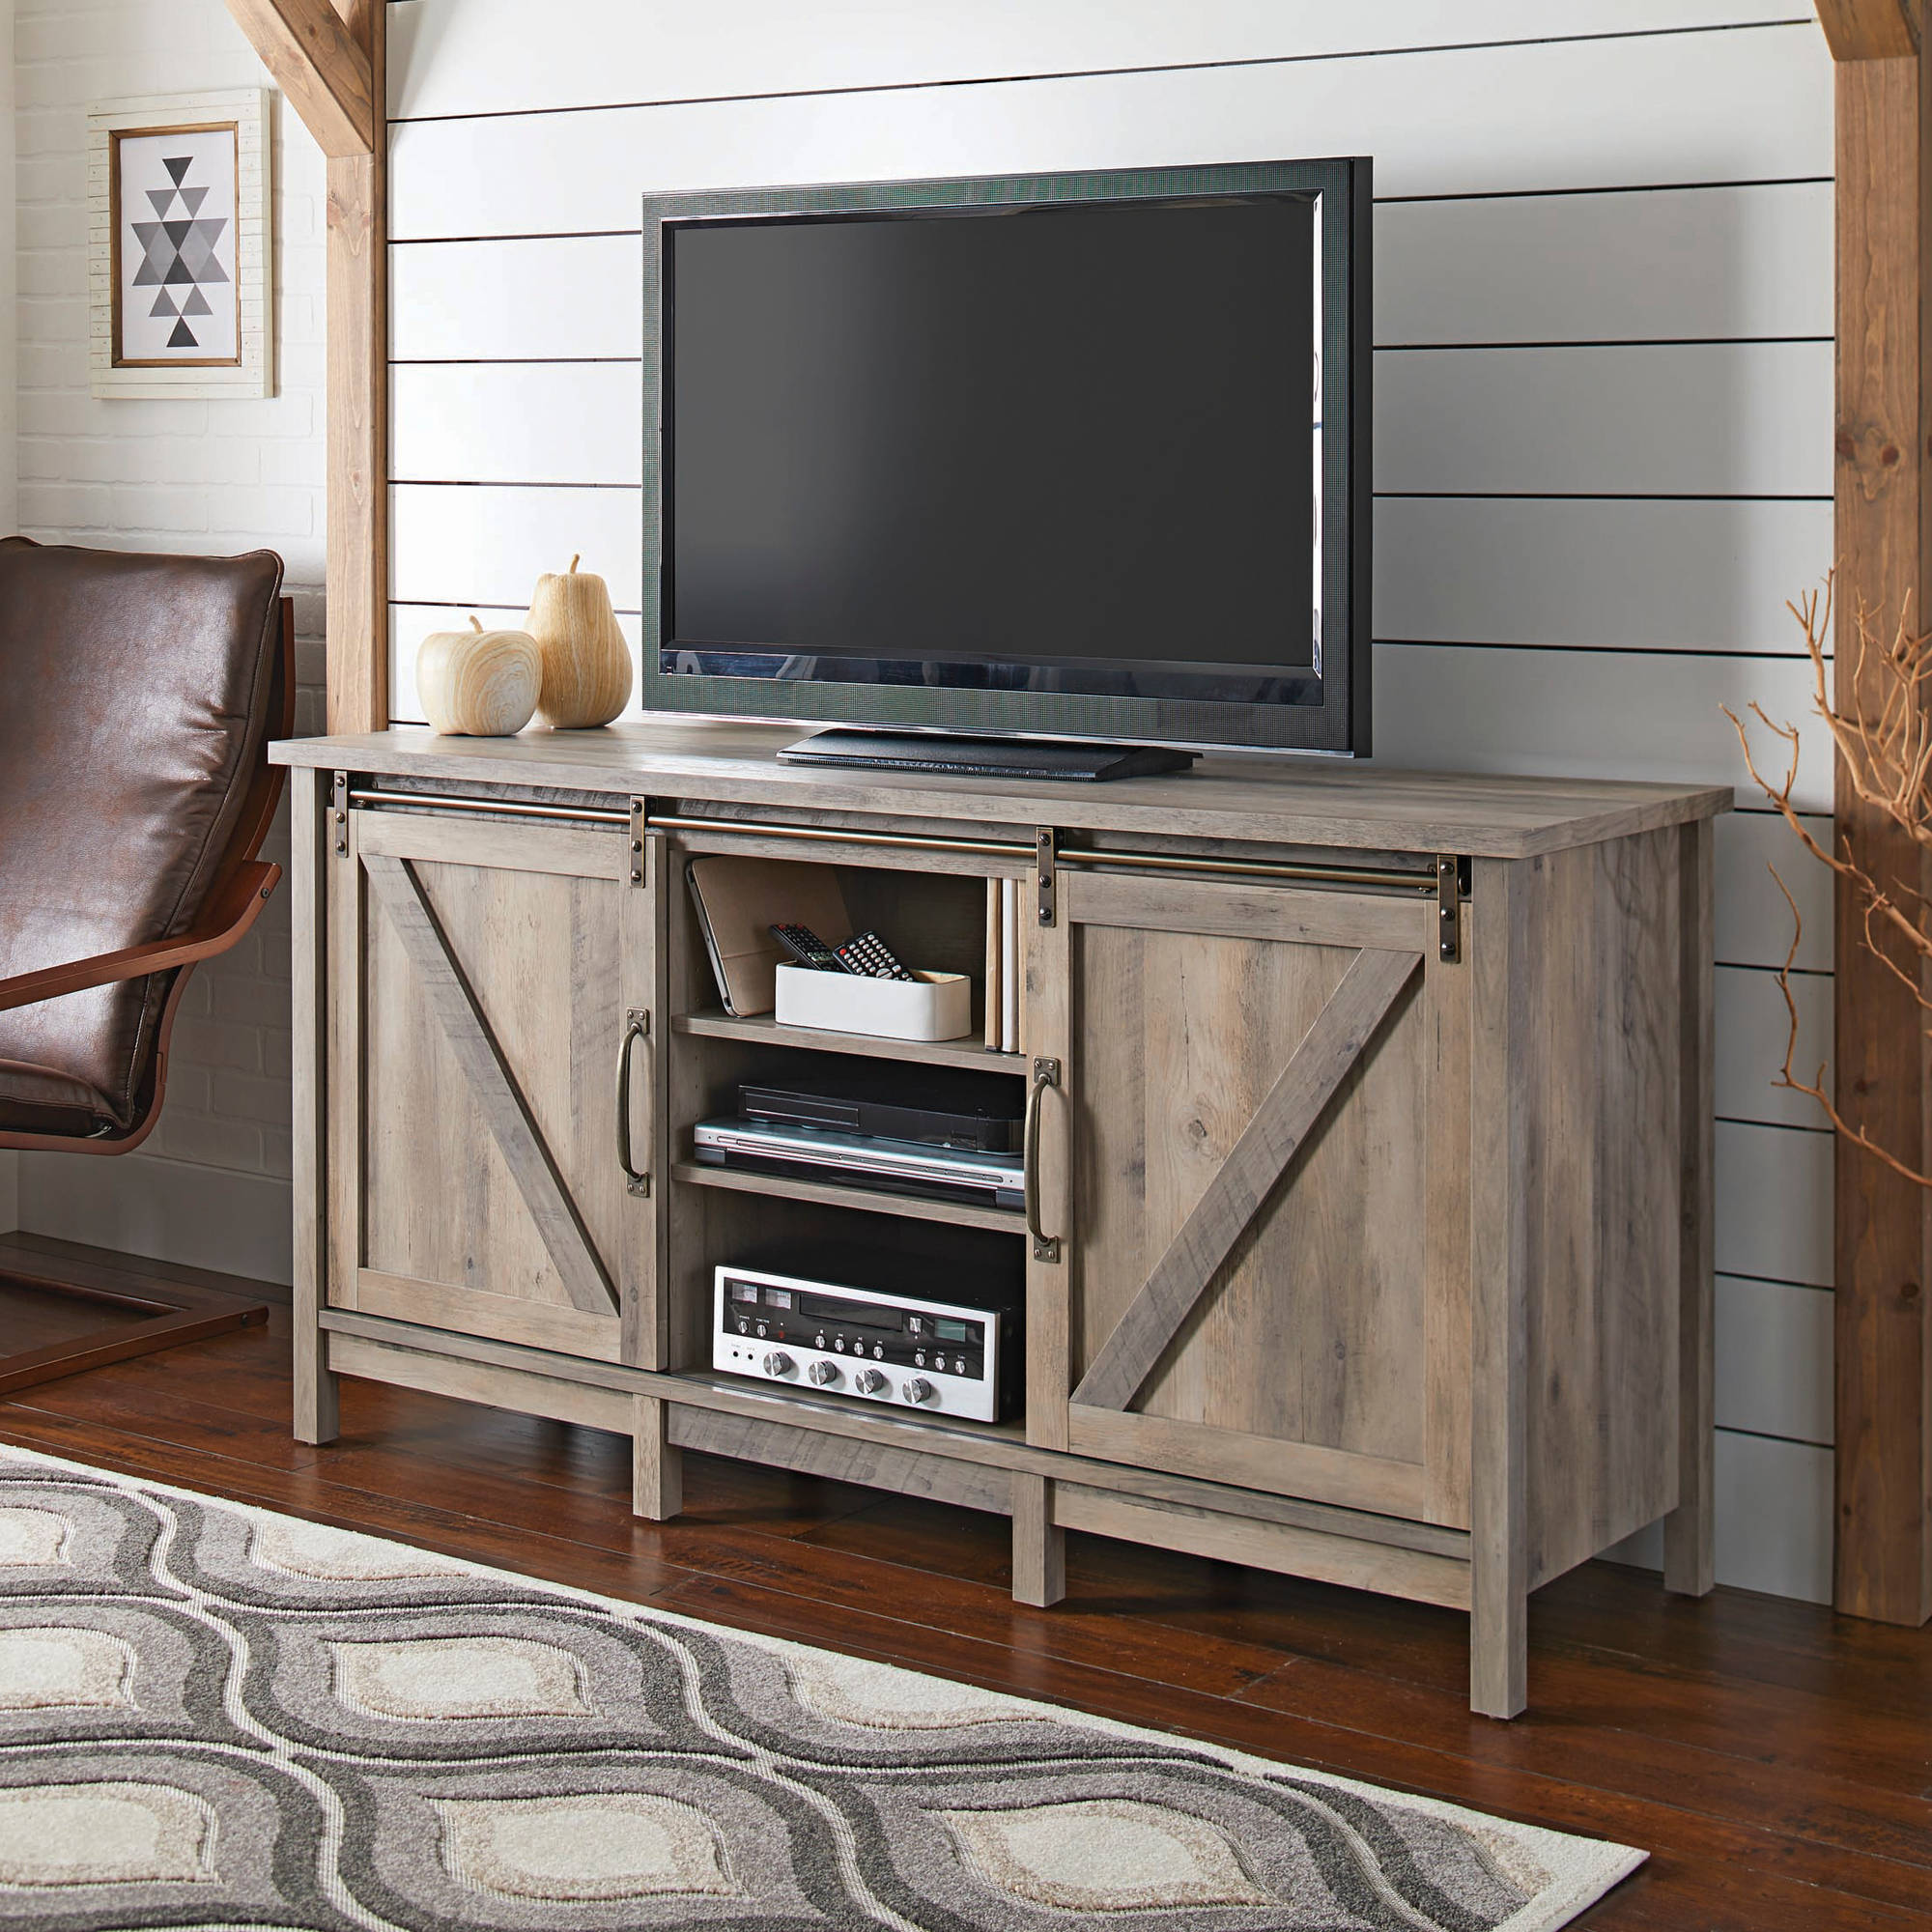 Better Homes & Gardens Modern Farmhouse TV Stand for TVs up to 70", Rustic Gray - image 1 of 14